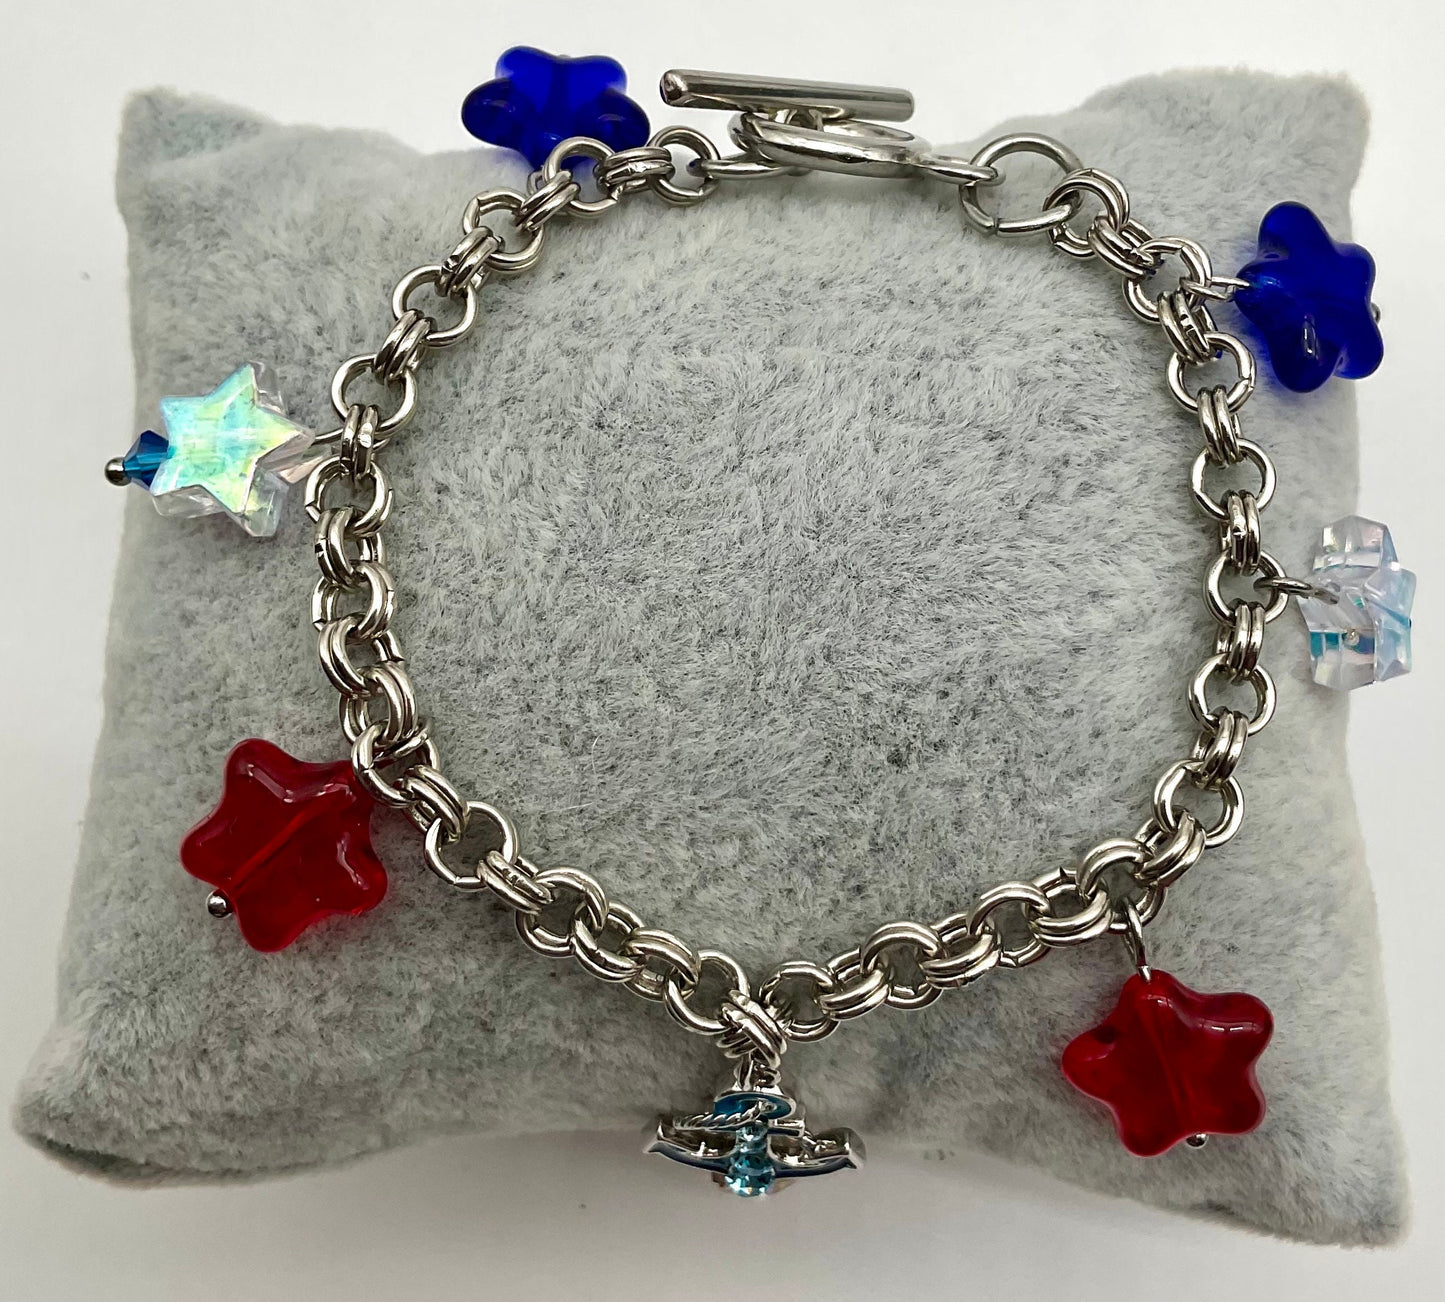 US Navy, Naval Sailor Anchor’s Away Bracelet Red , White and Blue Military Armed Forces USNC Stars Jewelry - 10% Donation to the USO